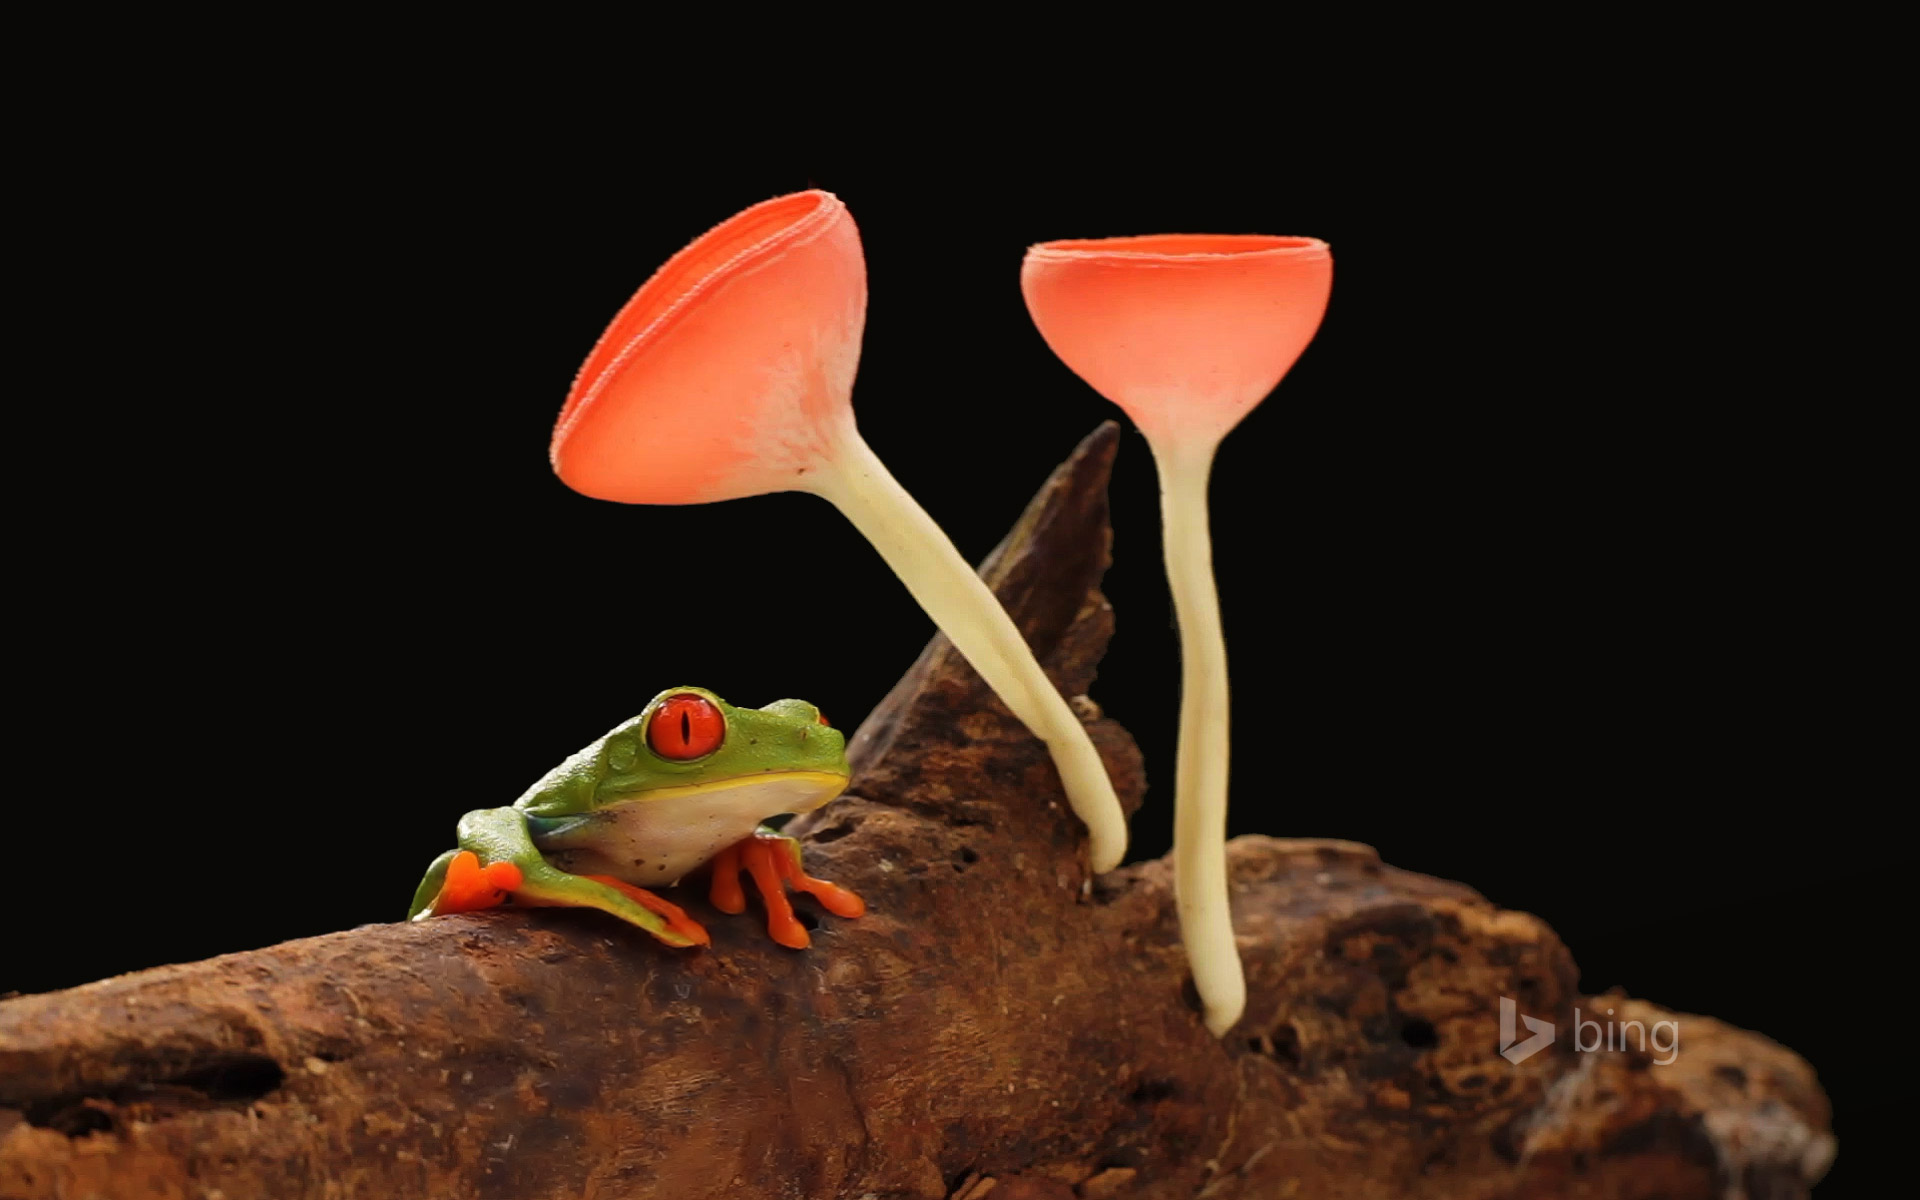 Red-eyed or gaudy leaf frog with mushrooms